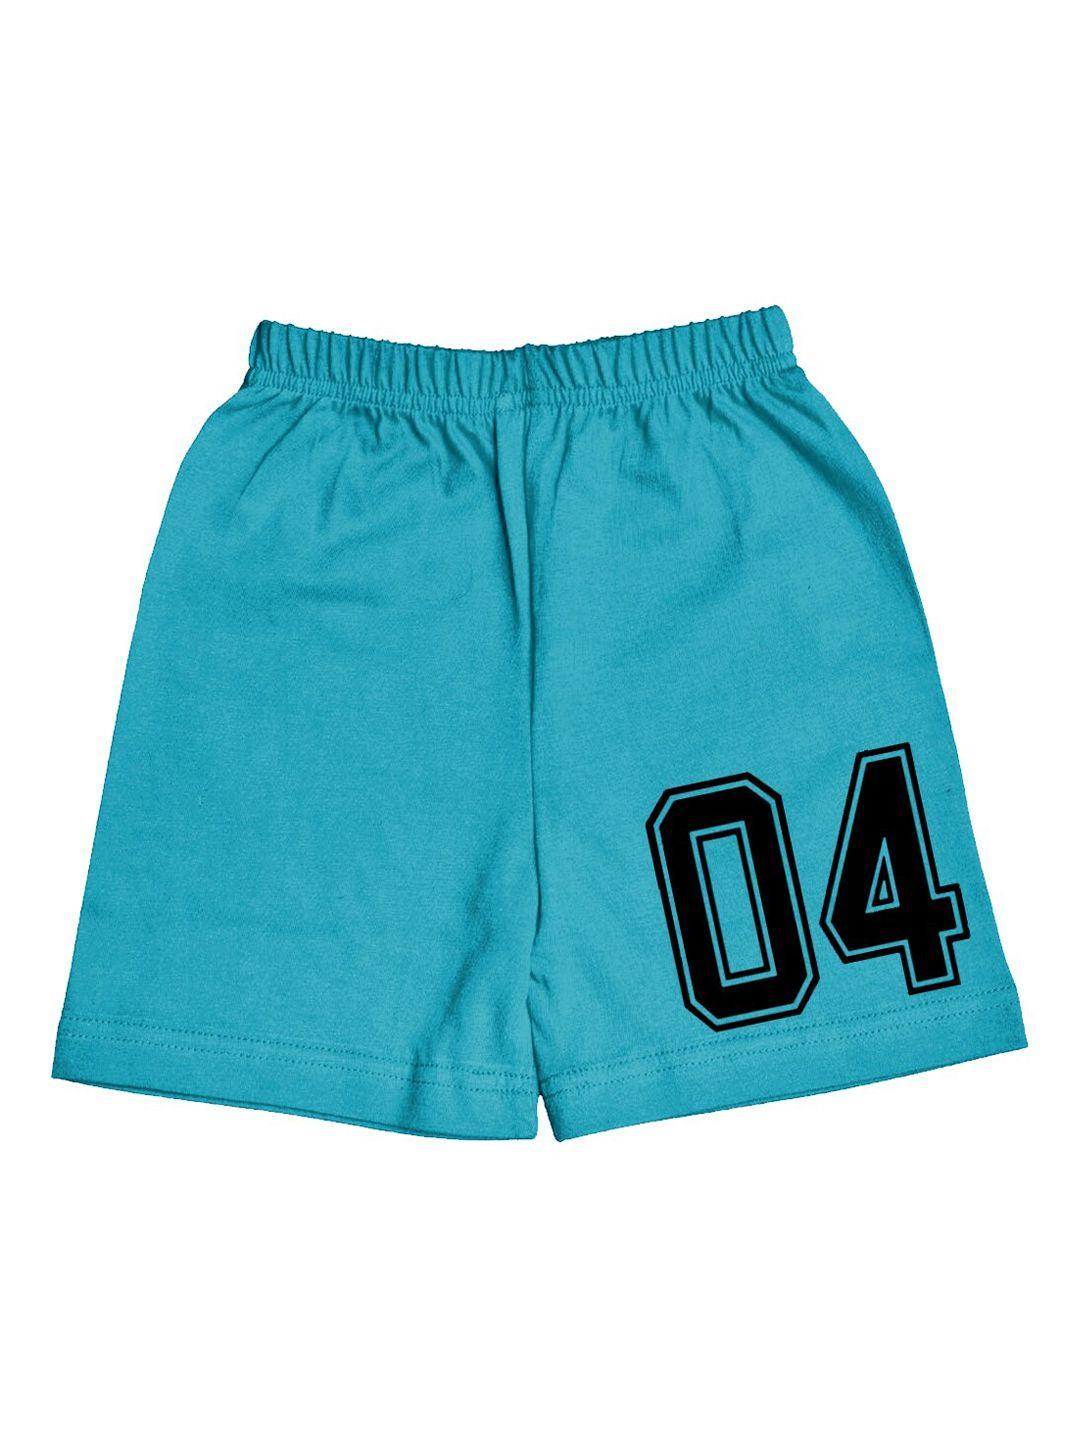 a.t.u.n. boys typography printed mid-rise knee length cotton shorts